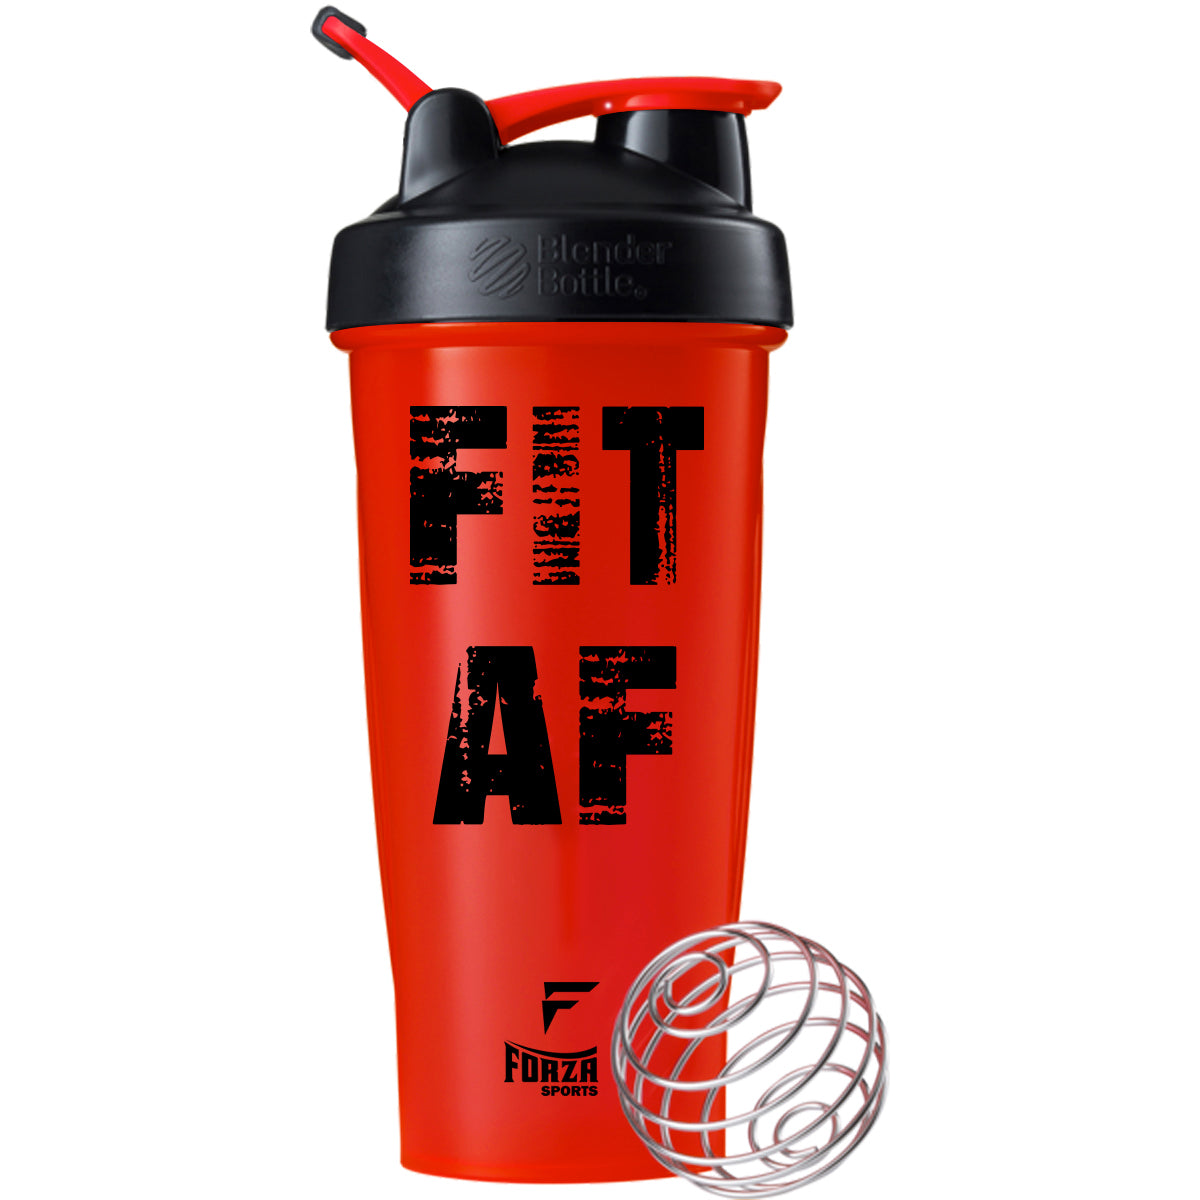 Blender Bottle x Forza Sports Classic 28 oz. Shaker Mixer Cup with Loop Top